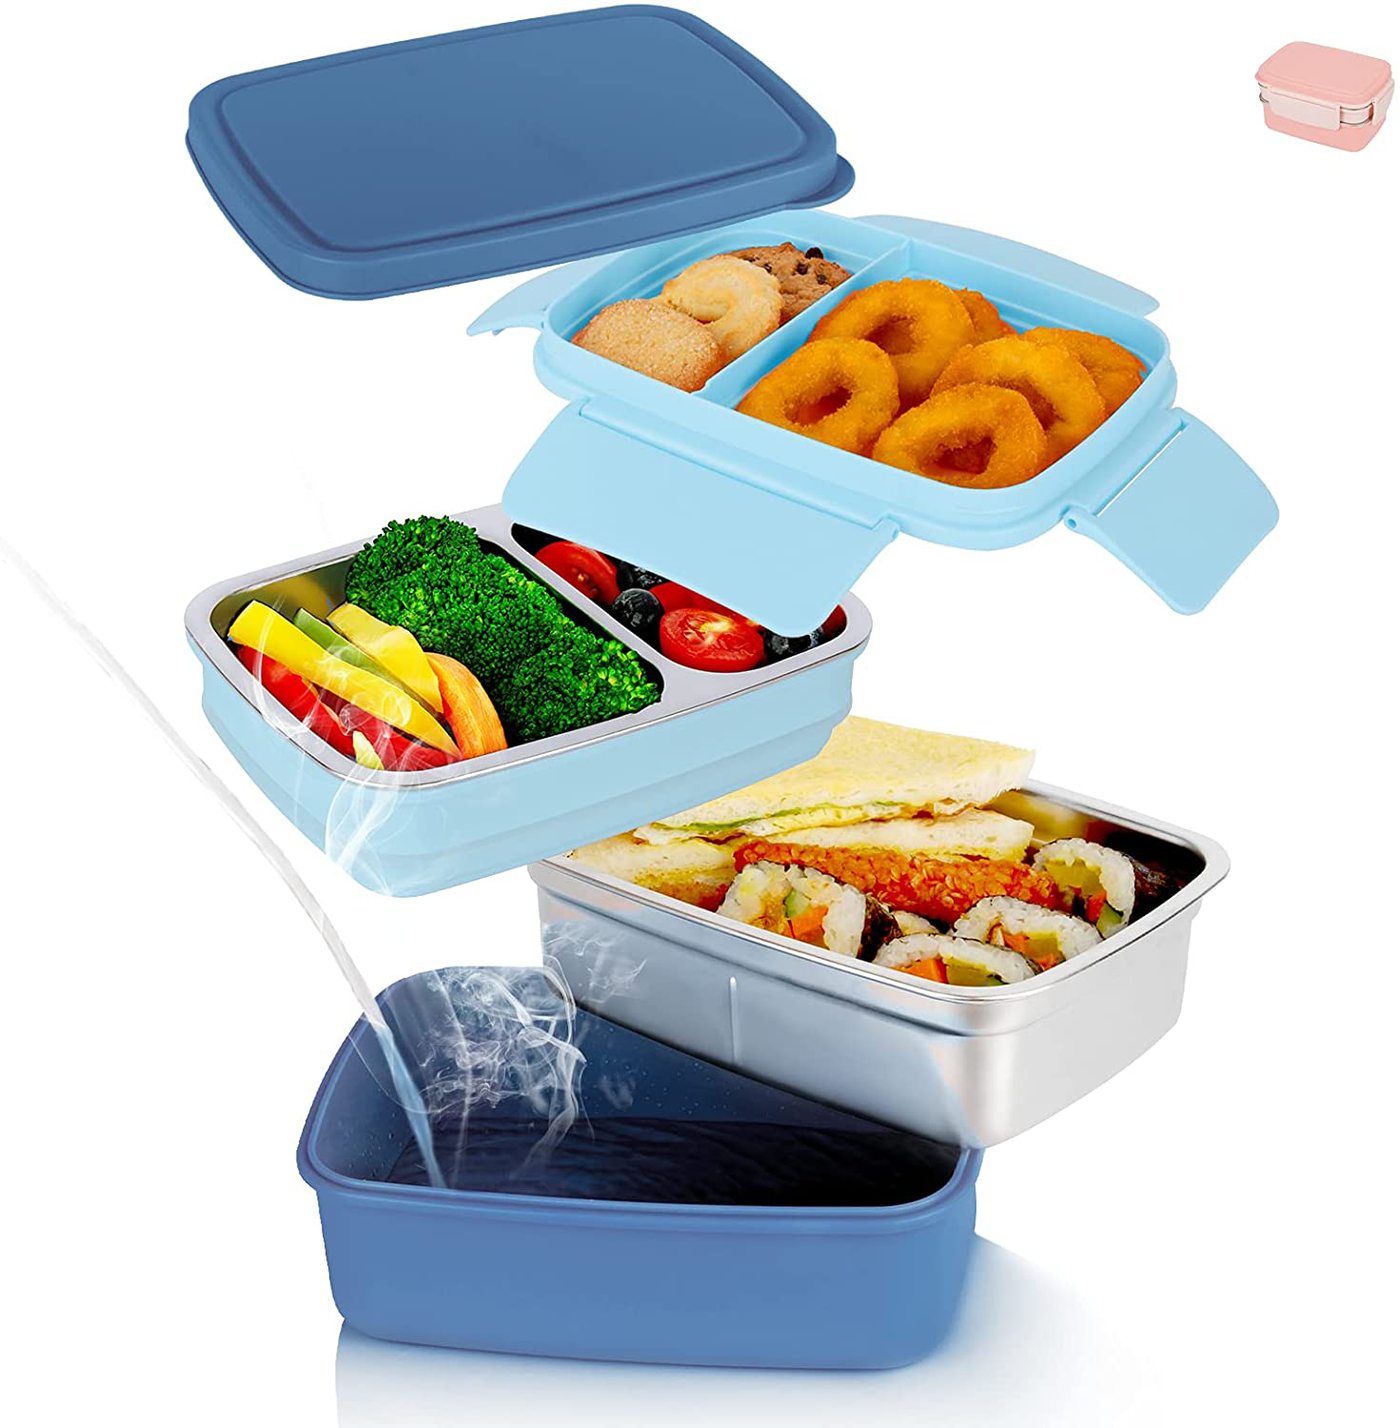 Stainless Steel Bento Box, Genteen Japanese Lunch Box for Kids, Double Layer Lunch Box Stackable Large Capacity with Divided Compartments for School Picnic, Blue